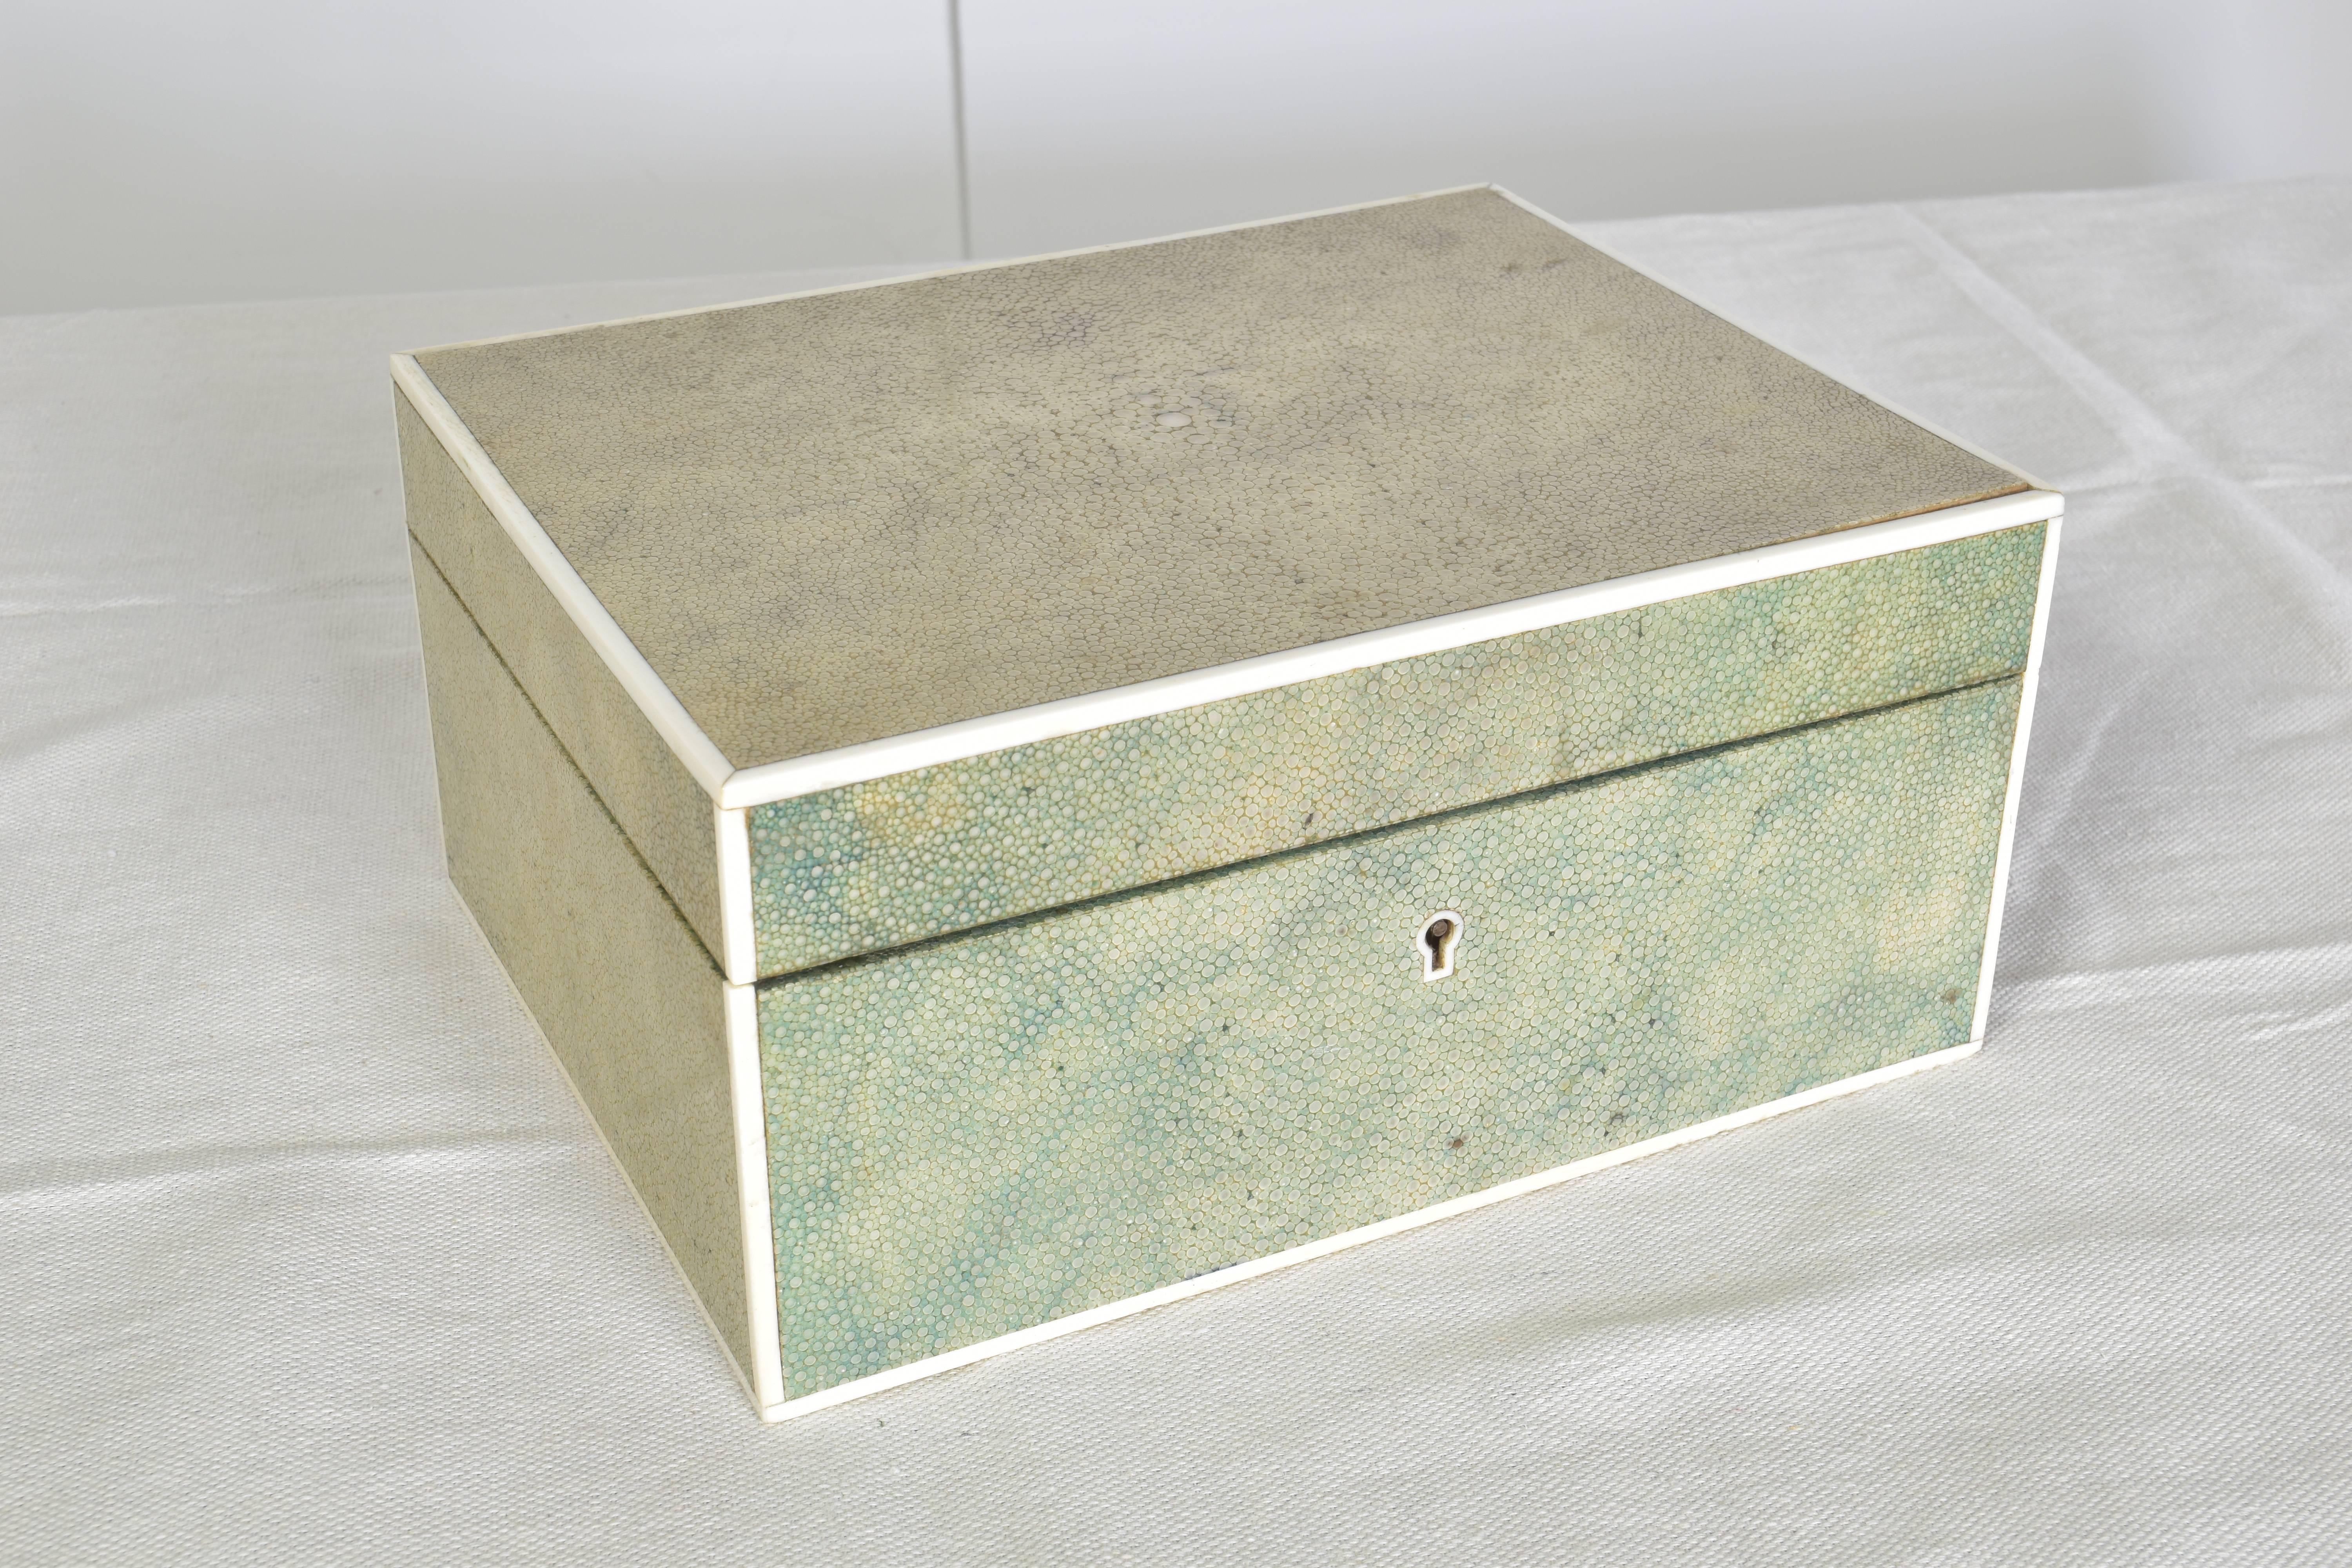 Beautiful hinged shagreen box in a pale green coloration.